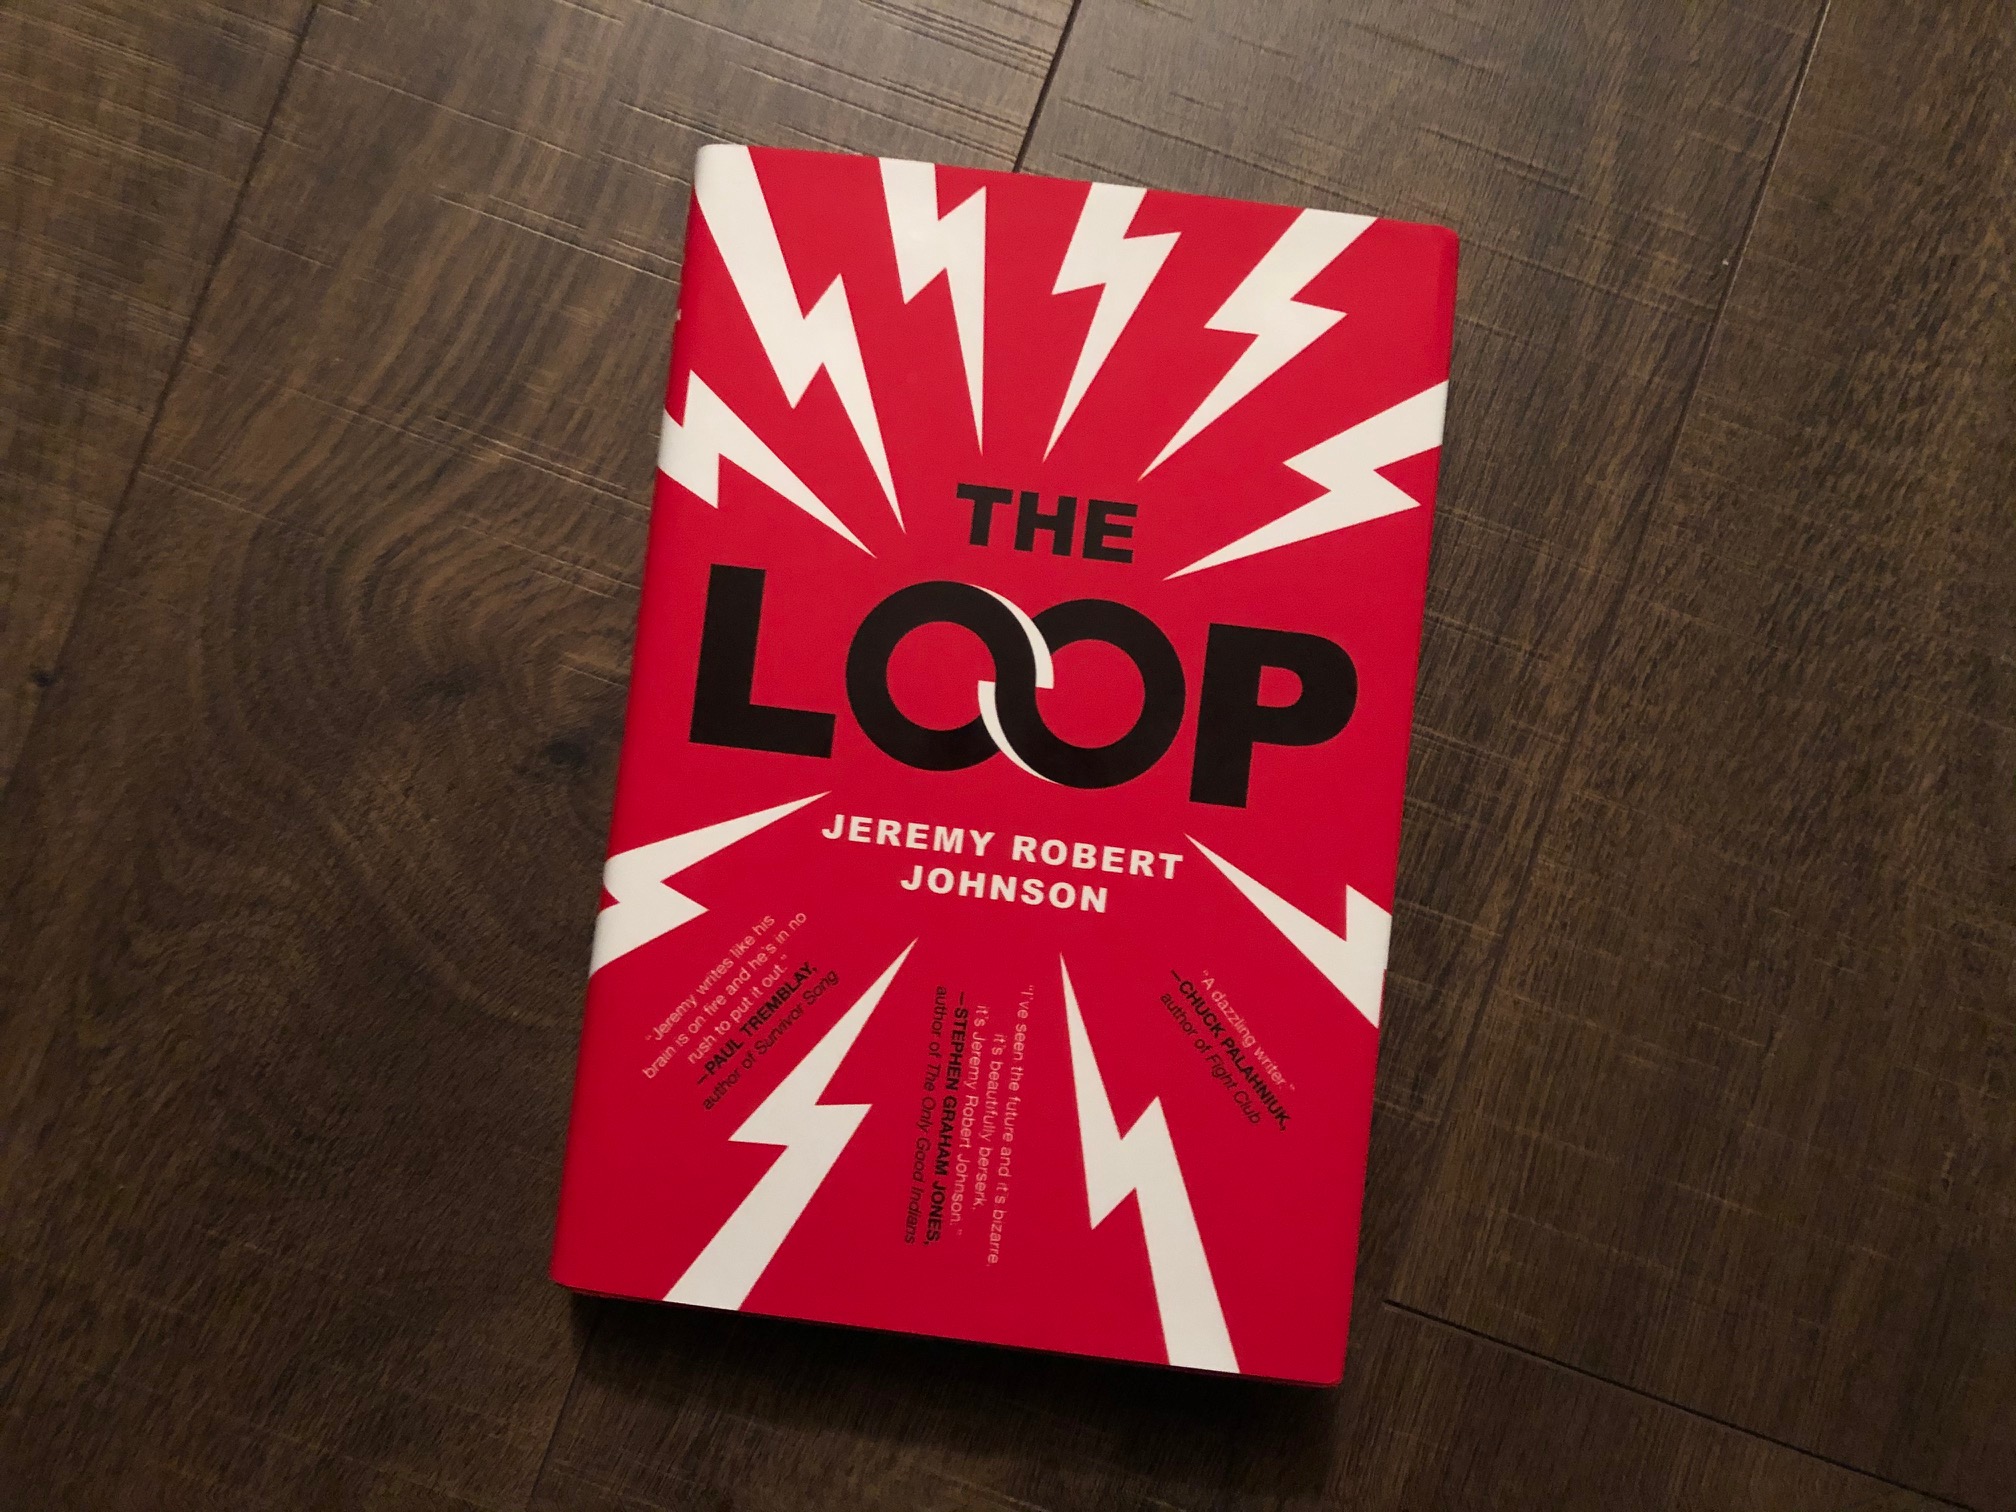 The Loop by Jeremy Robert Johnson book photo by Erica Robyn Reads